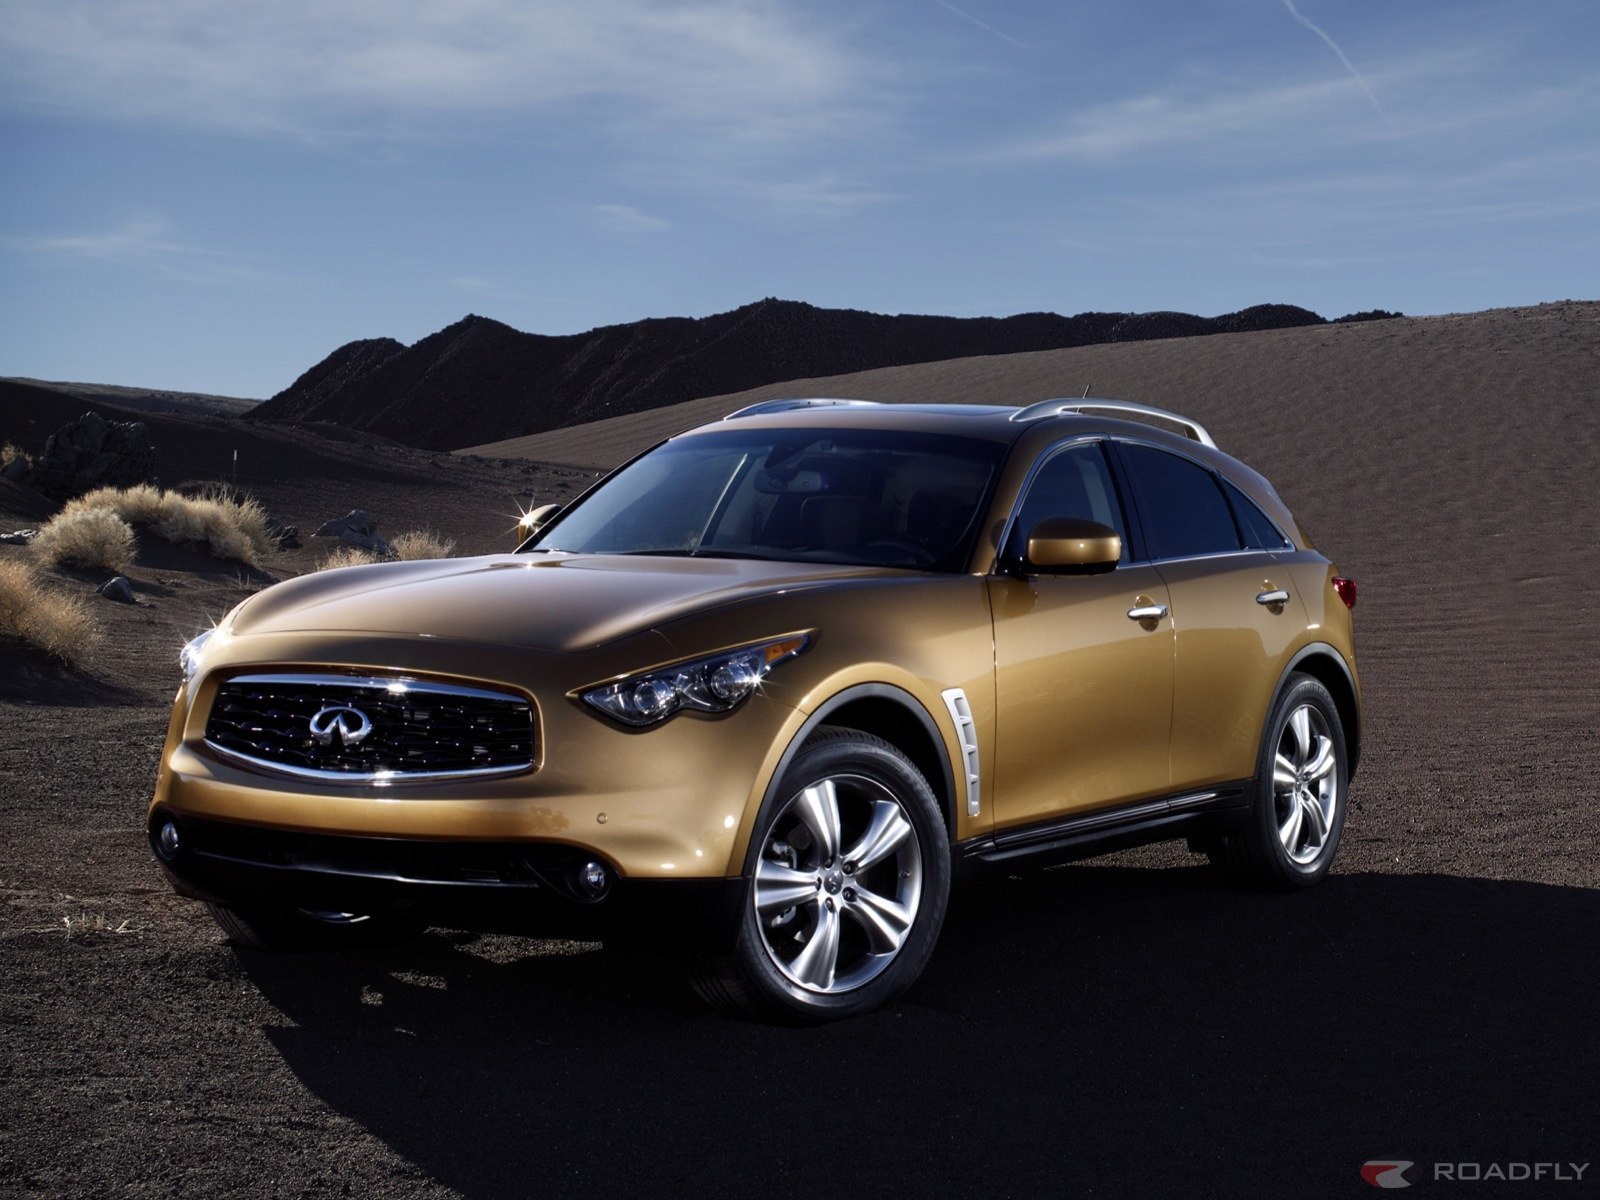 Infiniti Image Fx HD Wallpaper And Background Photos